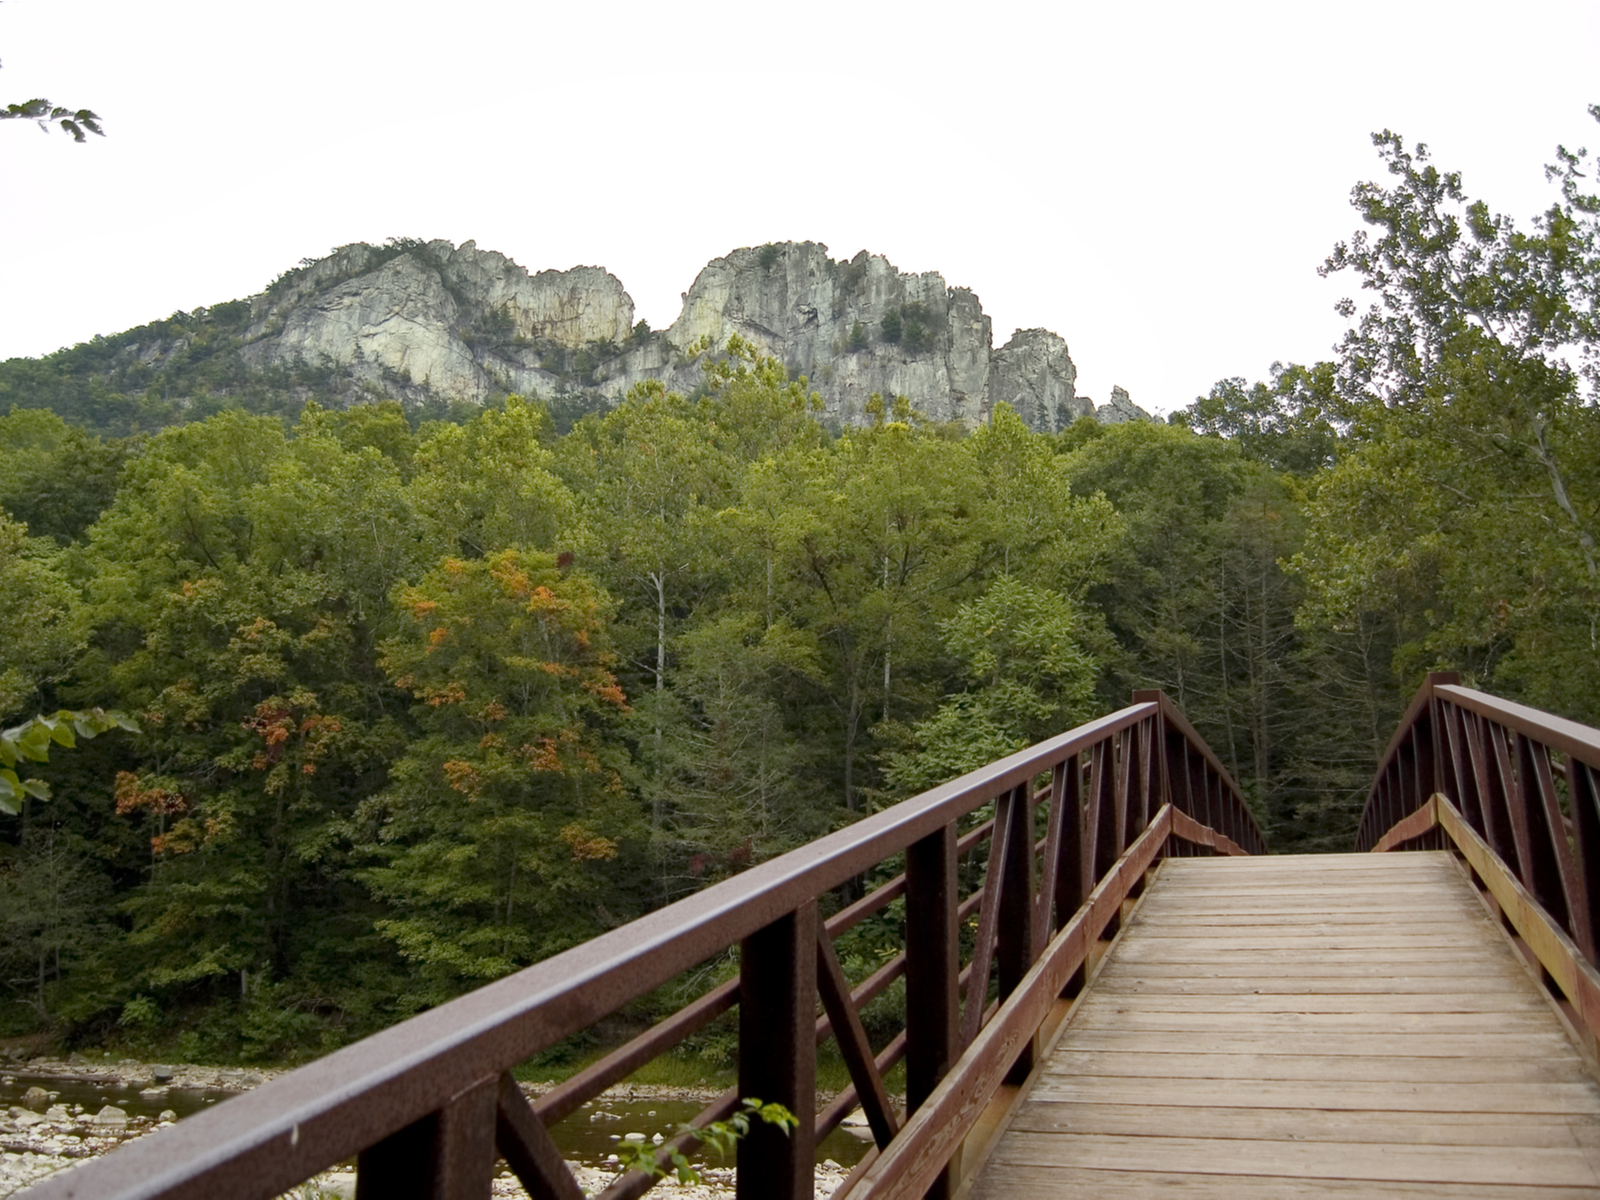 The famous Seneca Rocks, one of the best attractions in West Virginia, surrounded by thick layers of trees seen from a wooden foot bridge